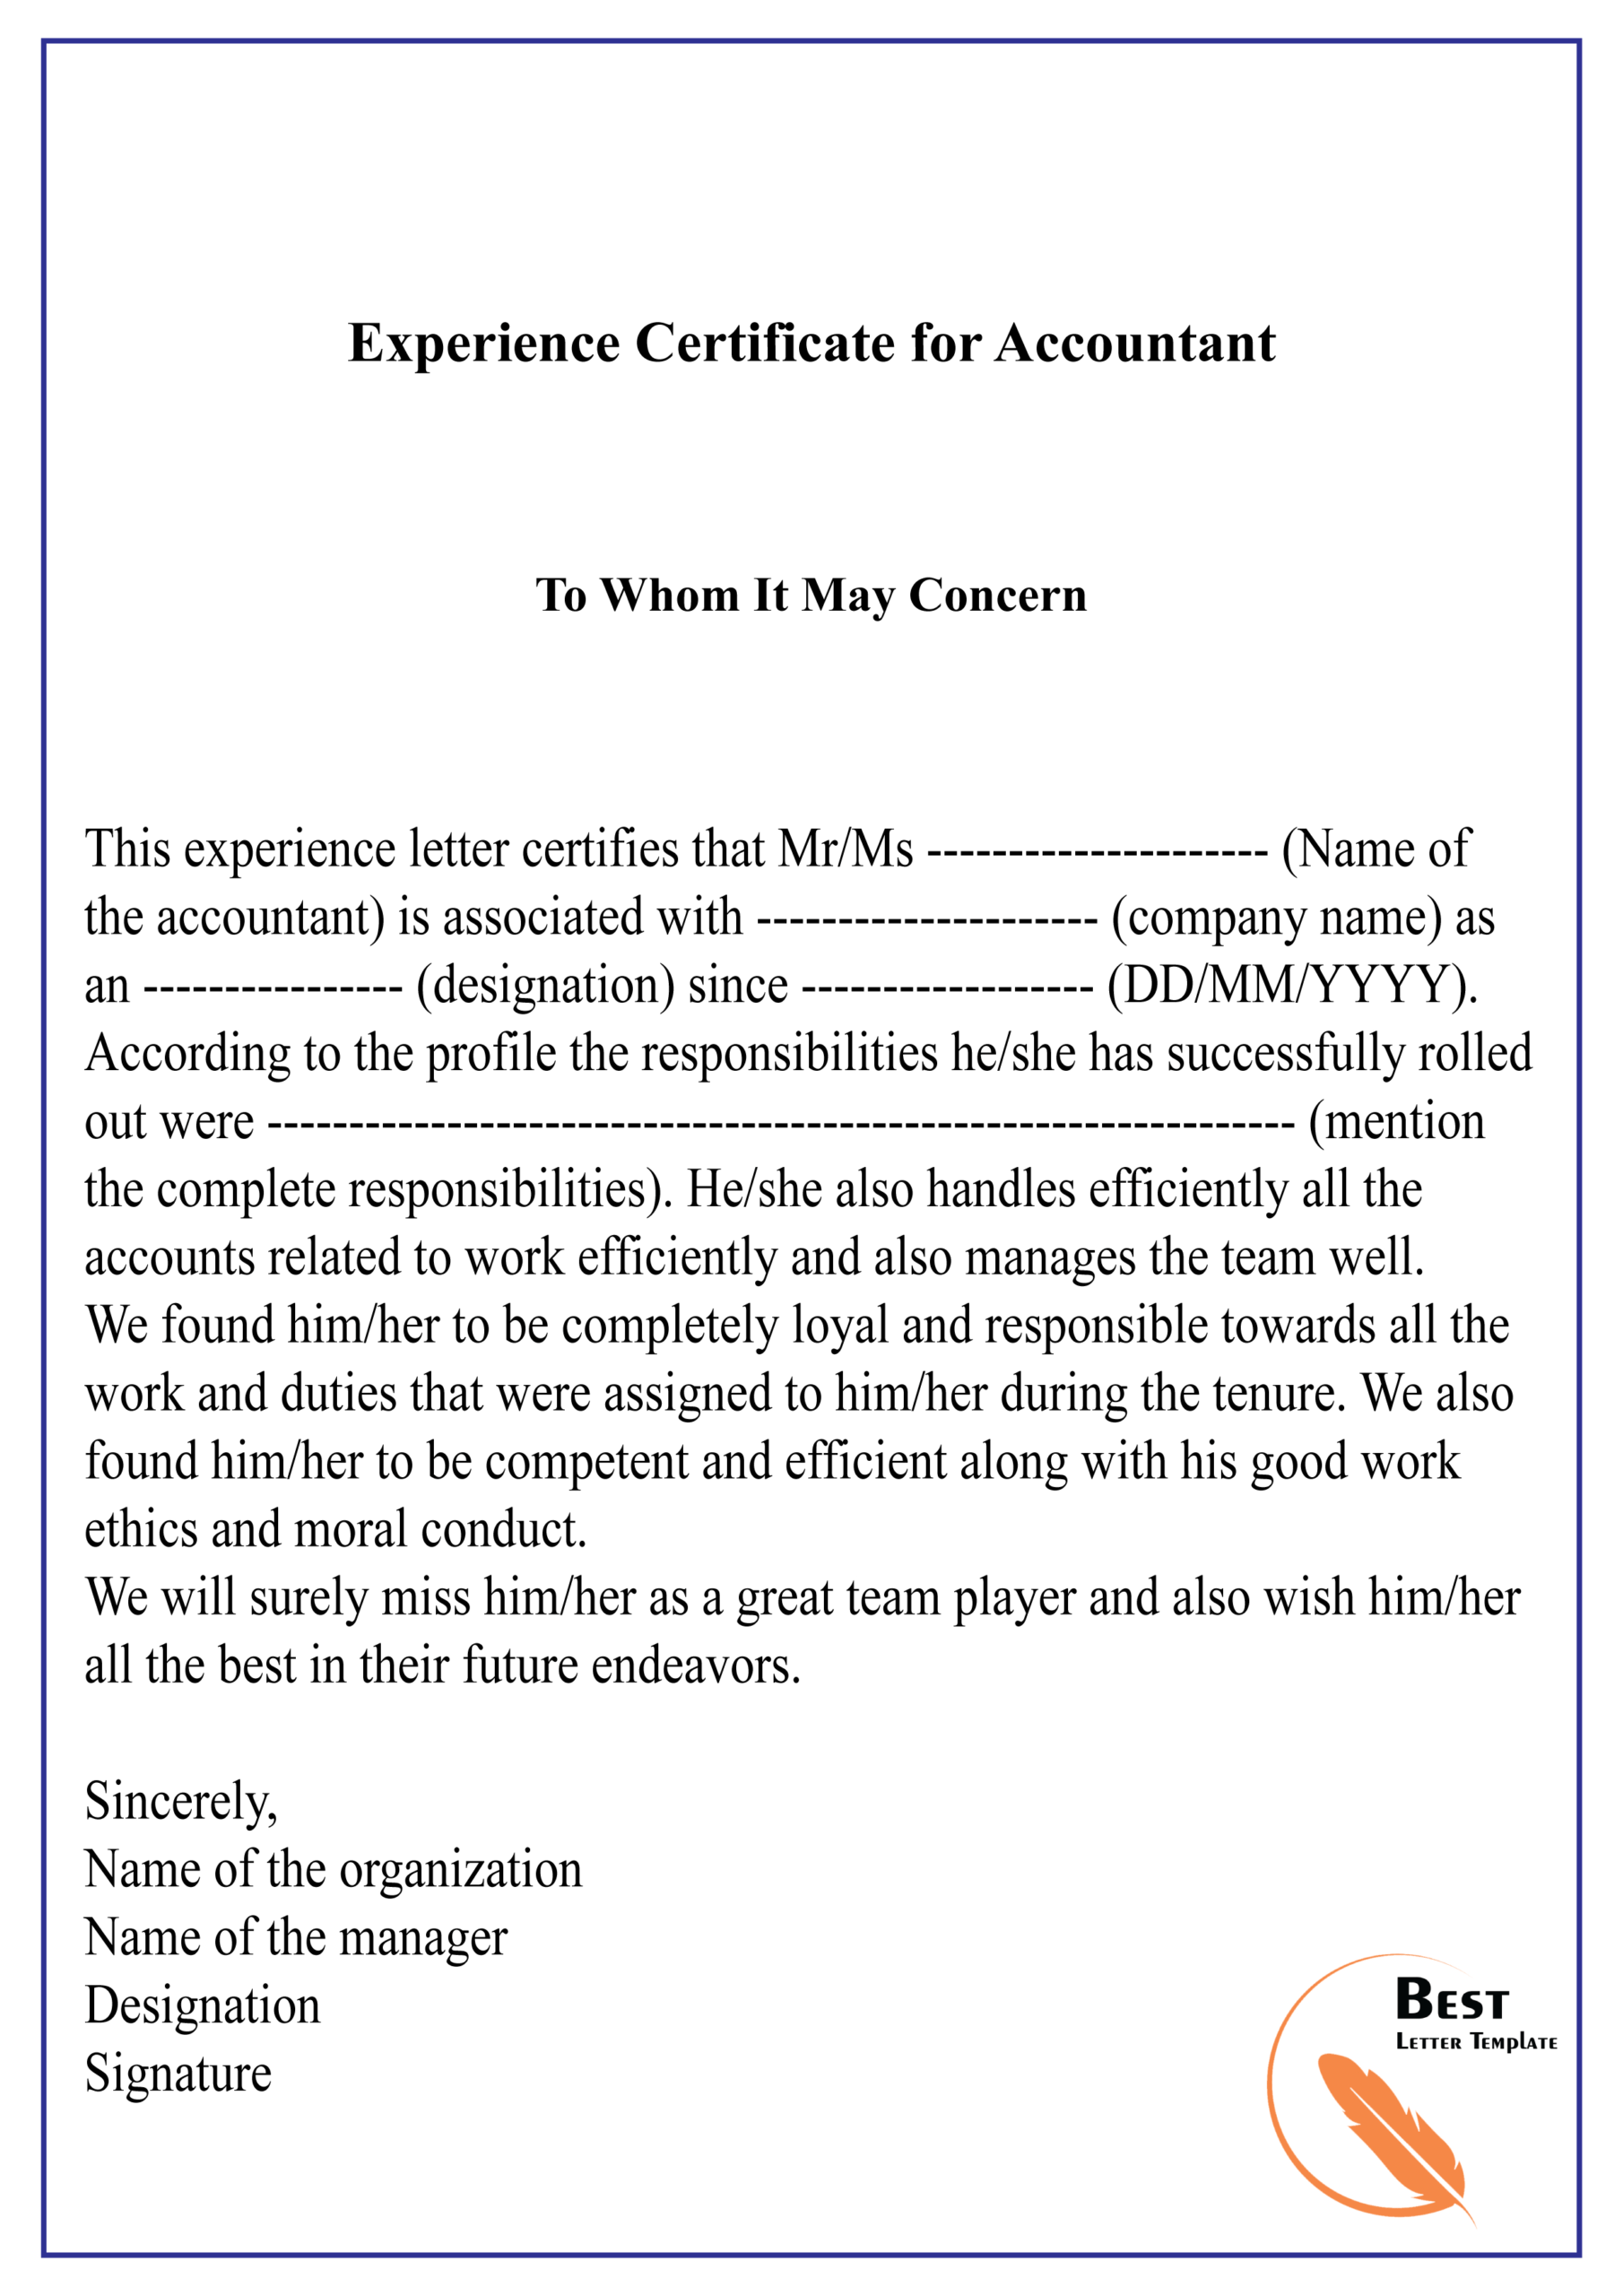 Experience Certificate For Accountant 01 | Best Letter Template Within Template Of Experience Certificate